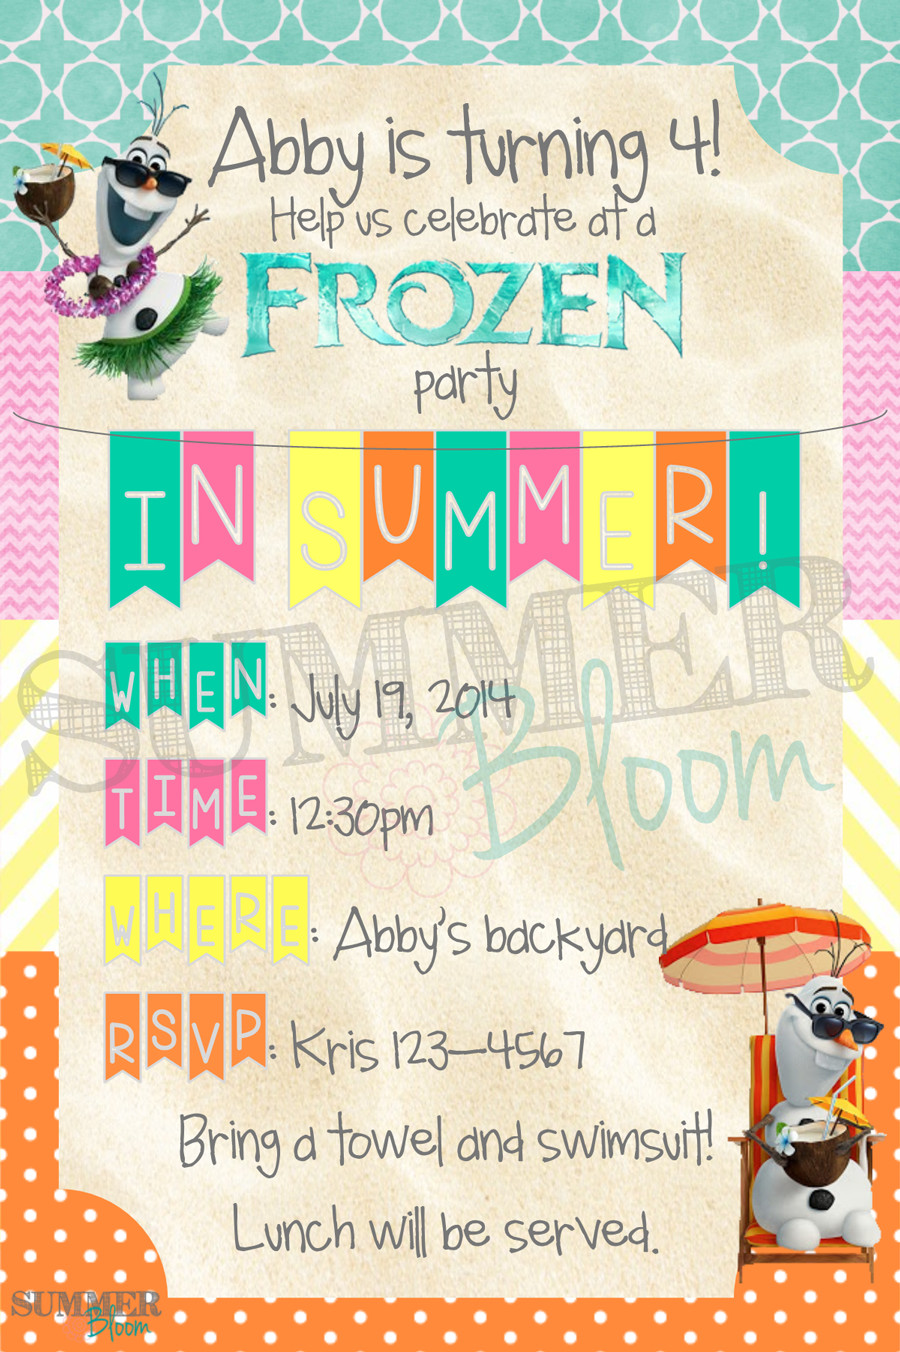 Summer Birthday Party Invitation Ideas
 Frozen and Olaf "In Summer" themed Birthday Party